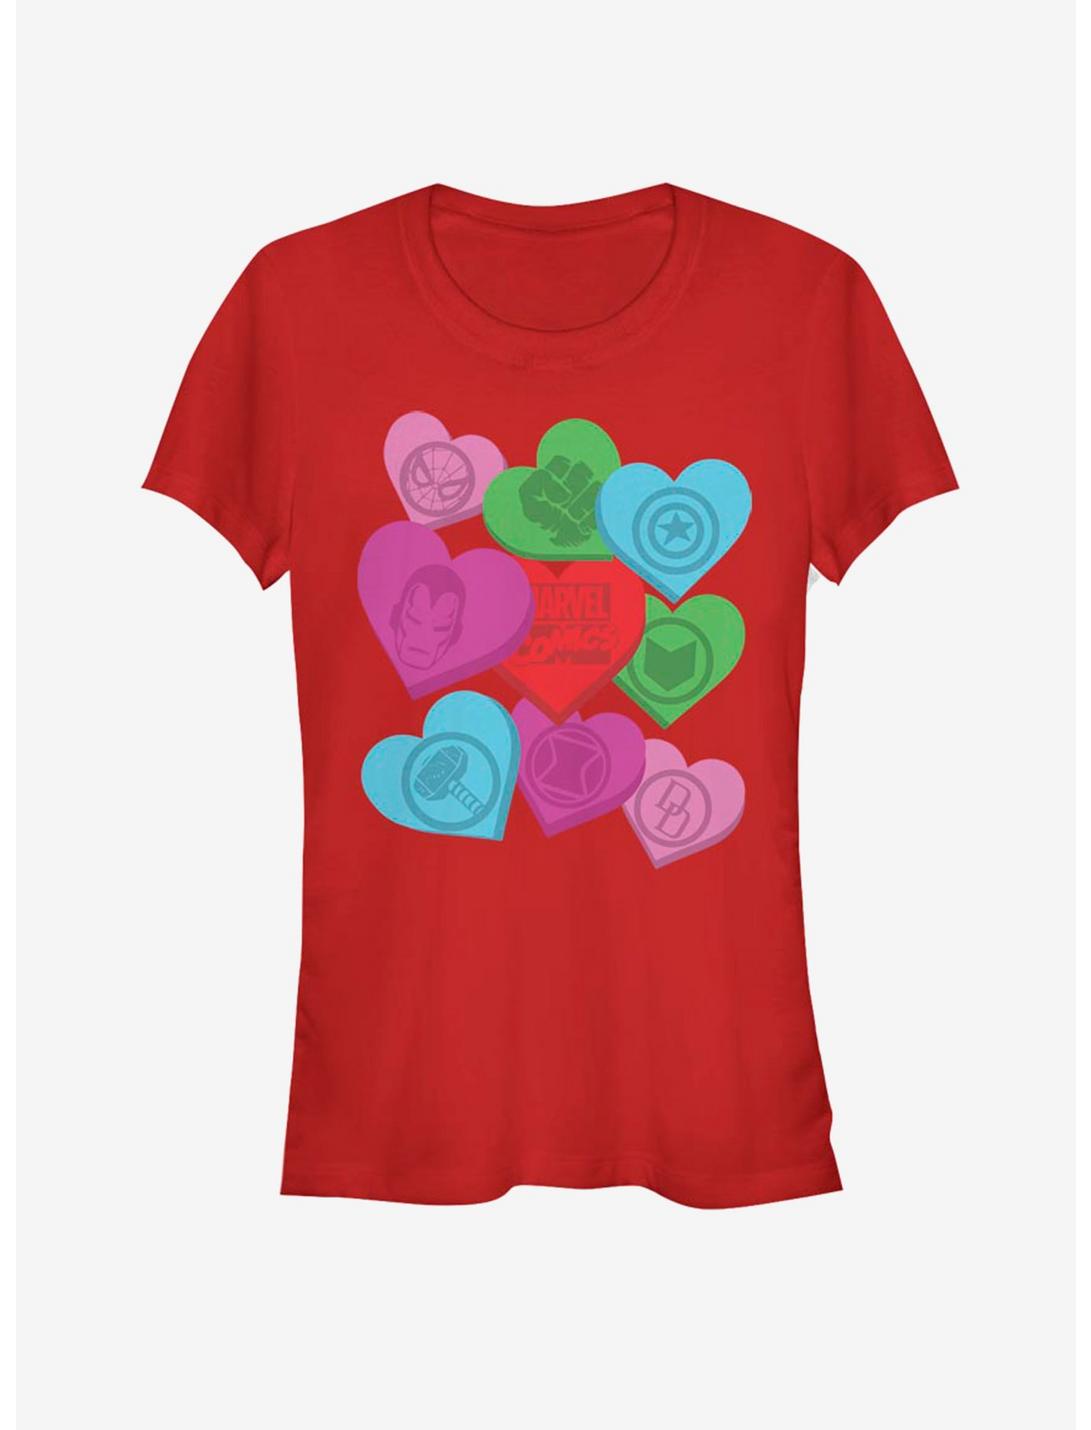 Marvel Avengers Candy Hearts Girls T-Shirt, RED, hi-res